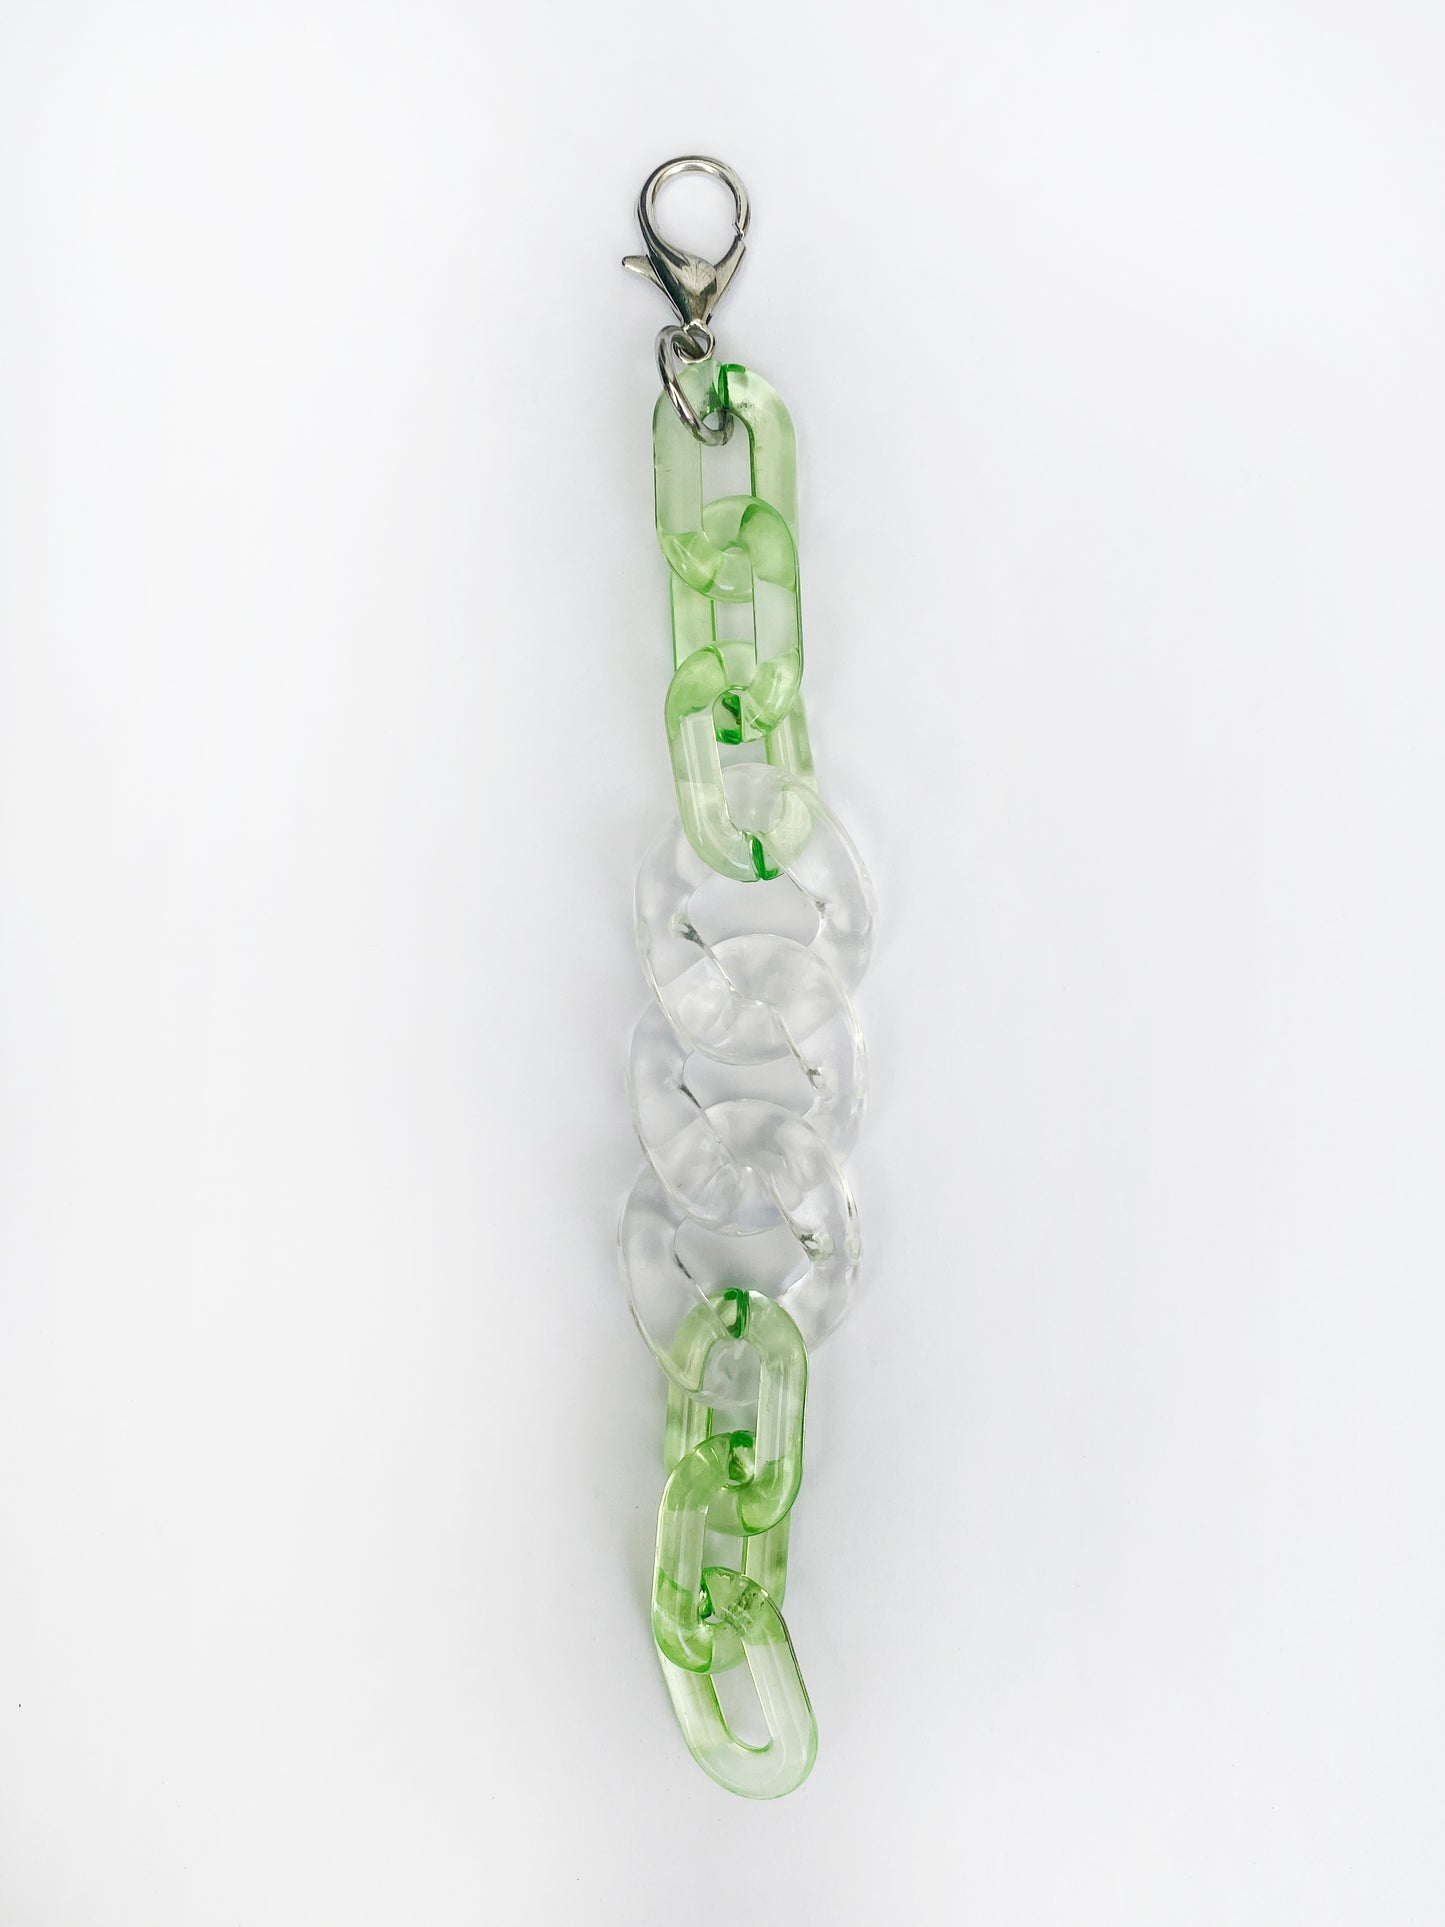 INFINITE COLORS Bracelet - Clear & Lime Green | cukimber designs